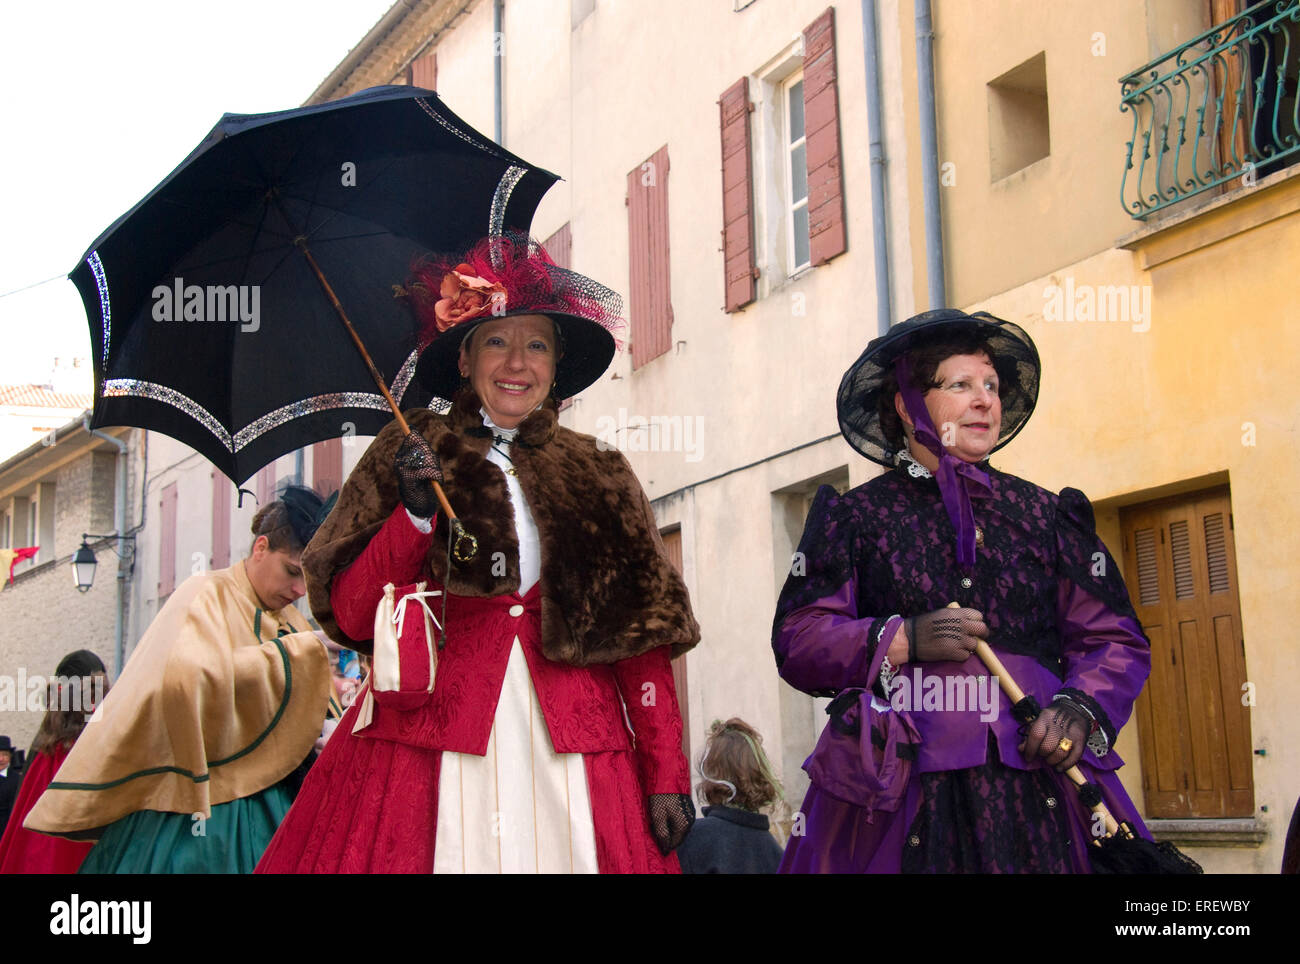 Two ladies in Victorian costumes taking part in a Valentine's Day parade in the village of Roquemaure, Southern France. Stock Photo